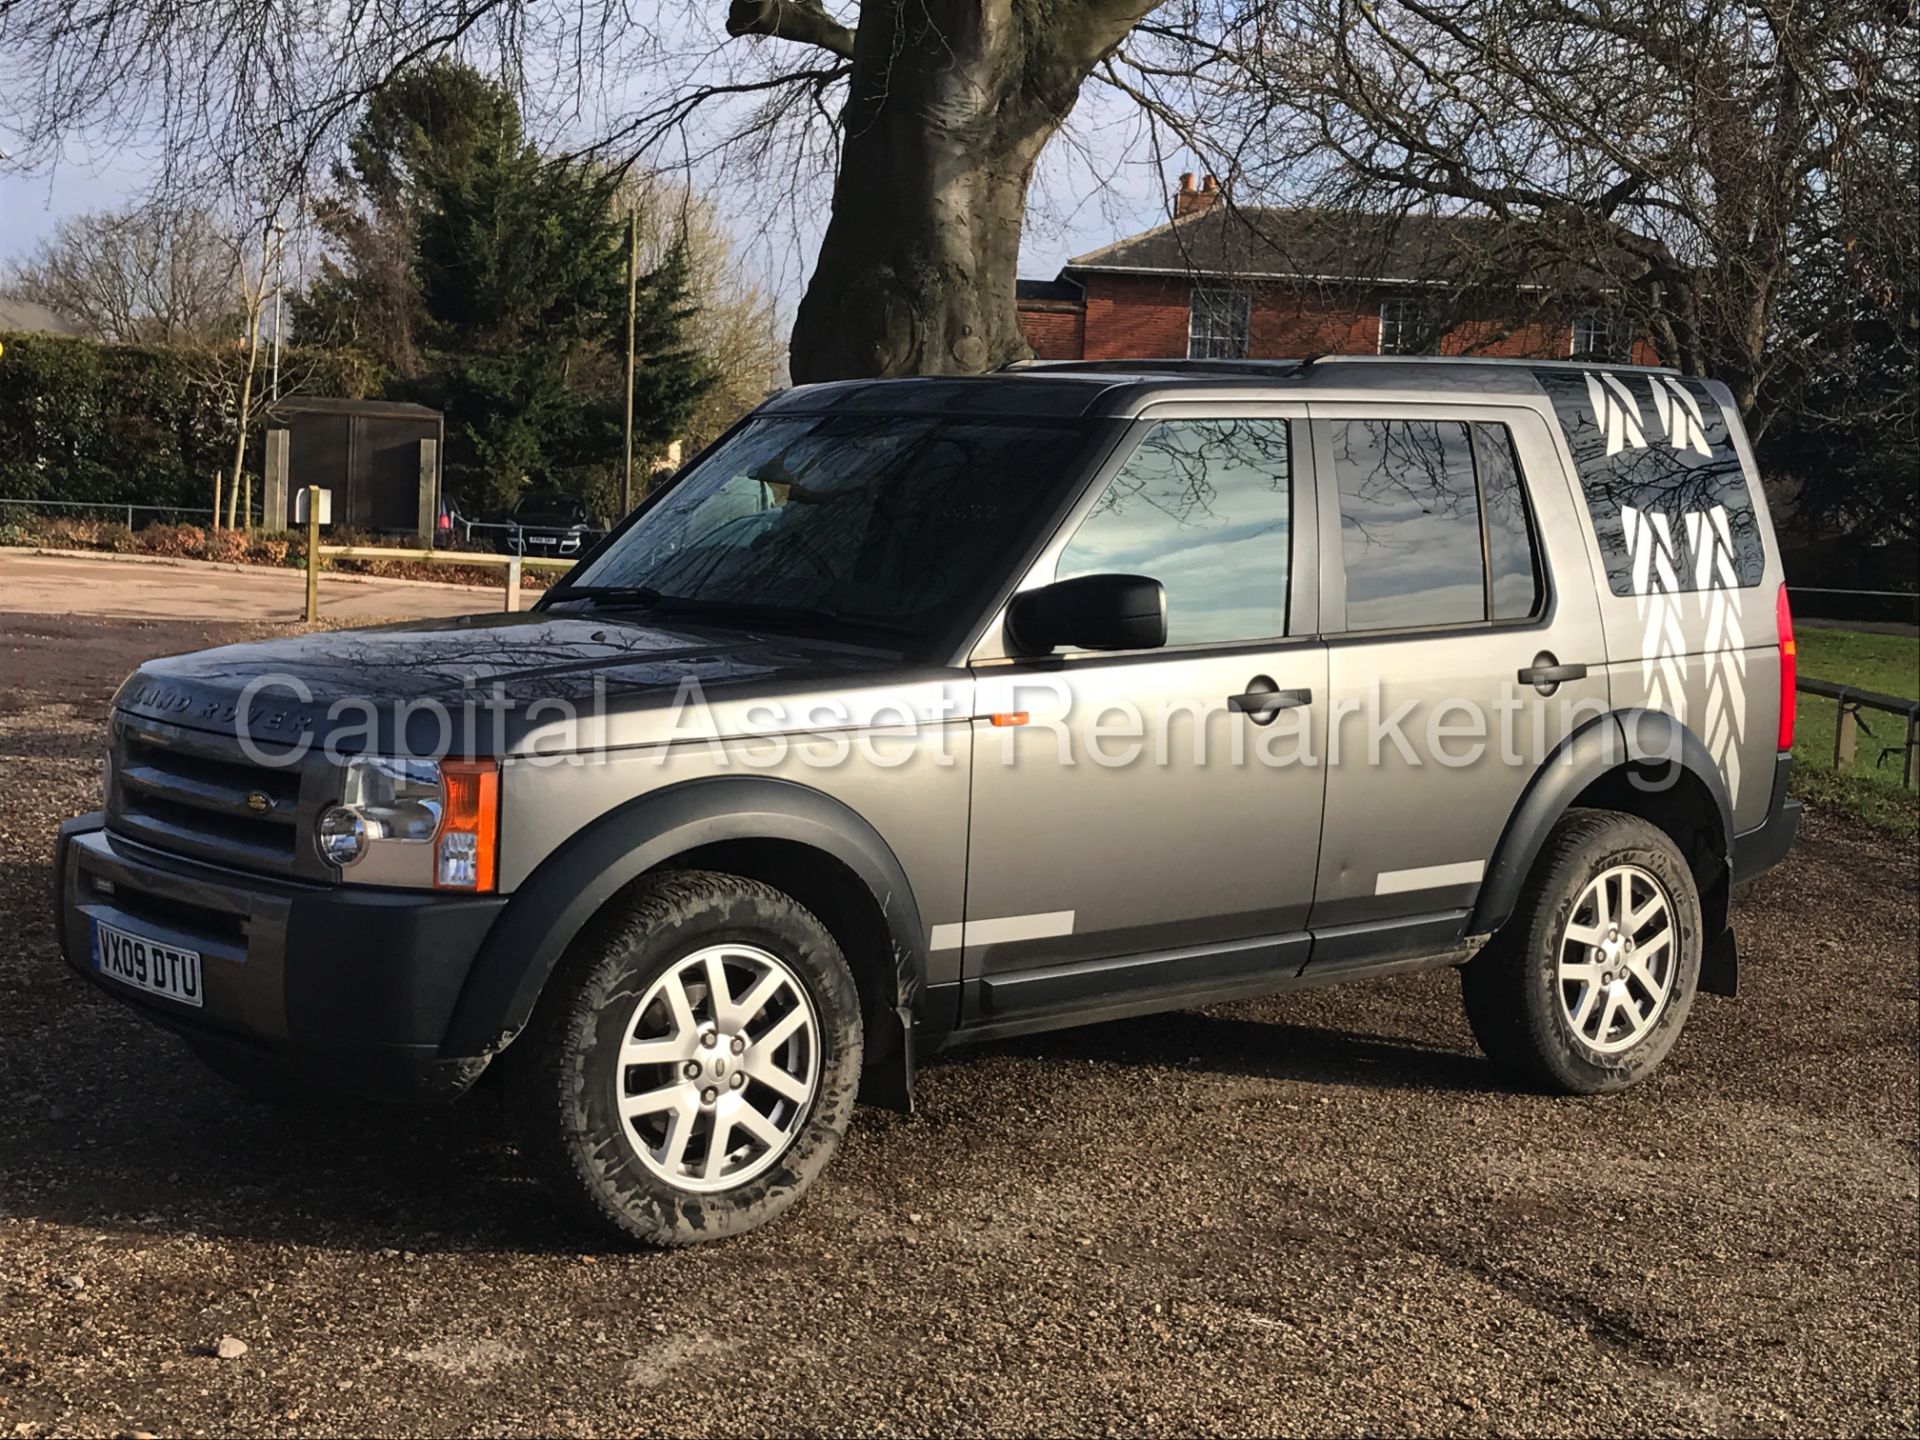 (On Sale) LAND ROVER DISCOVERY 3 'COMMERCIAL' (2009 - 09 REG) '2.7 TDV6 - AUTO TIP TRONIC' *RARE* - Image 2 of 26